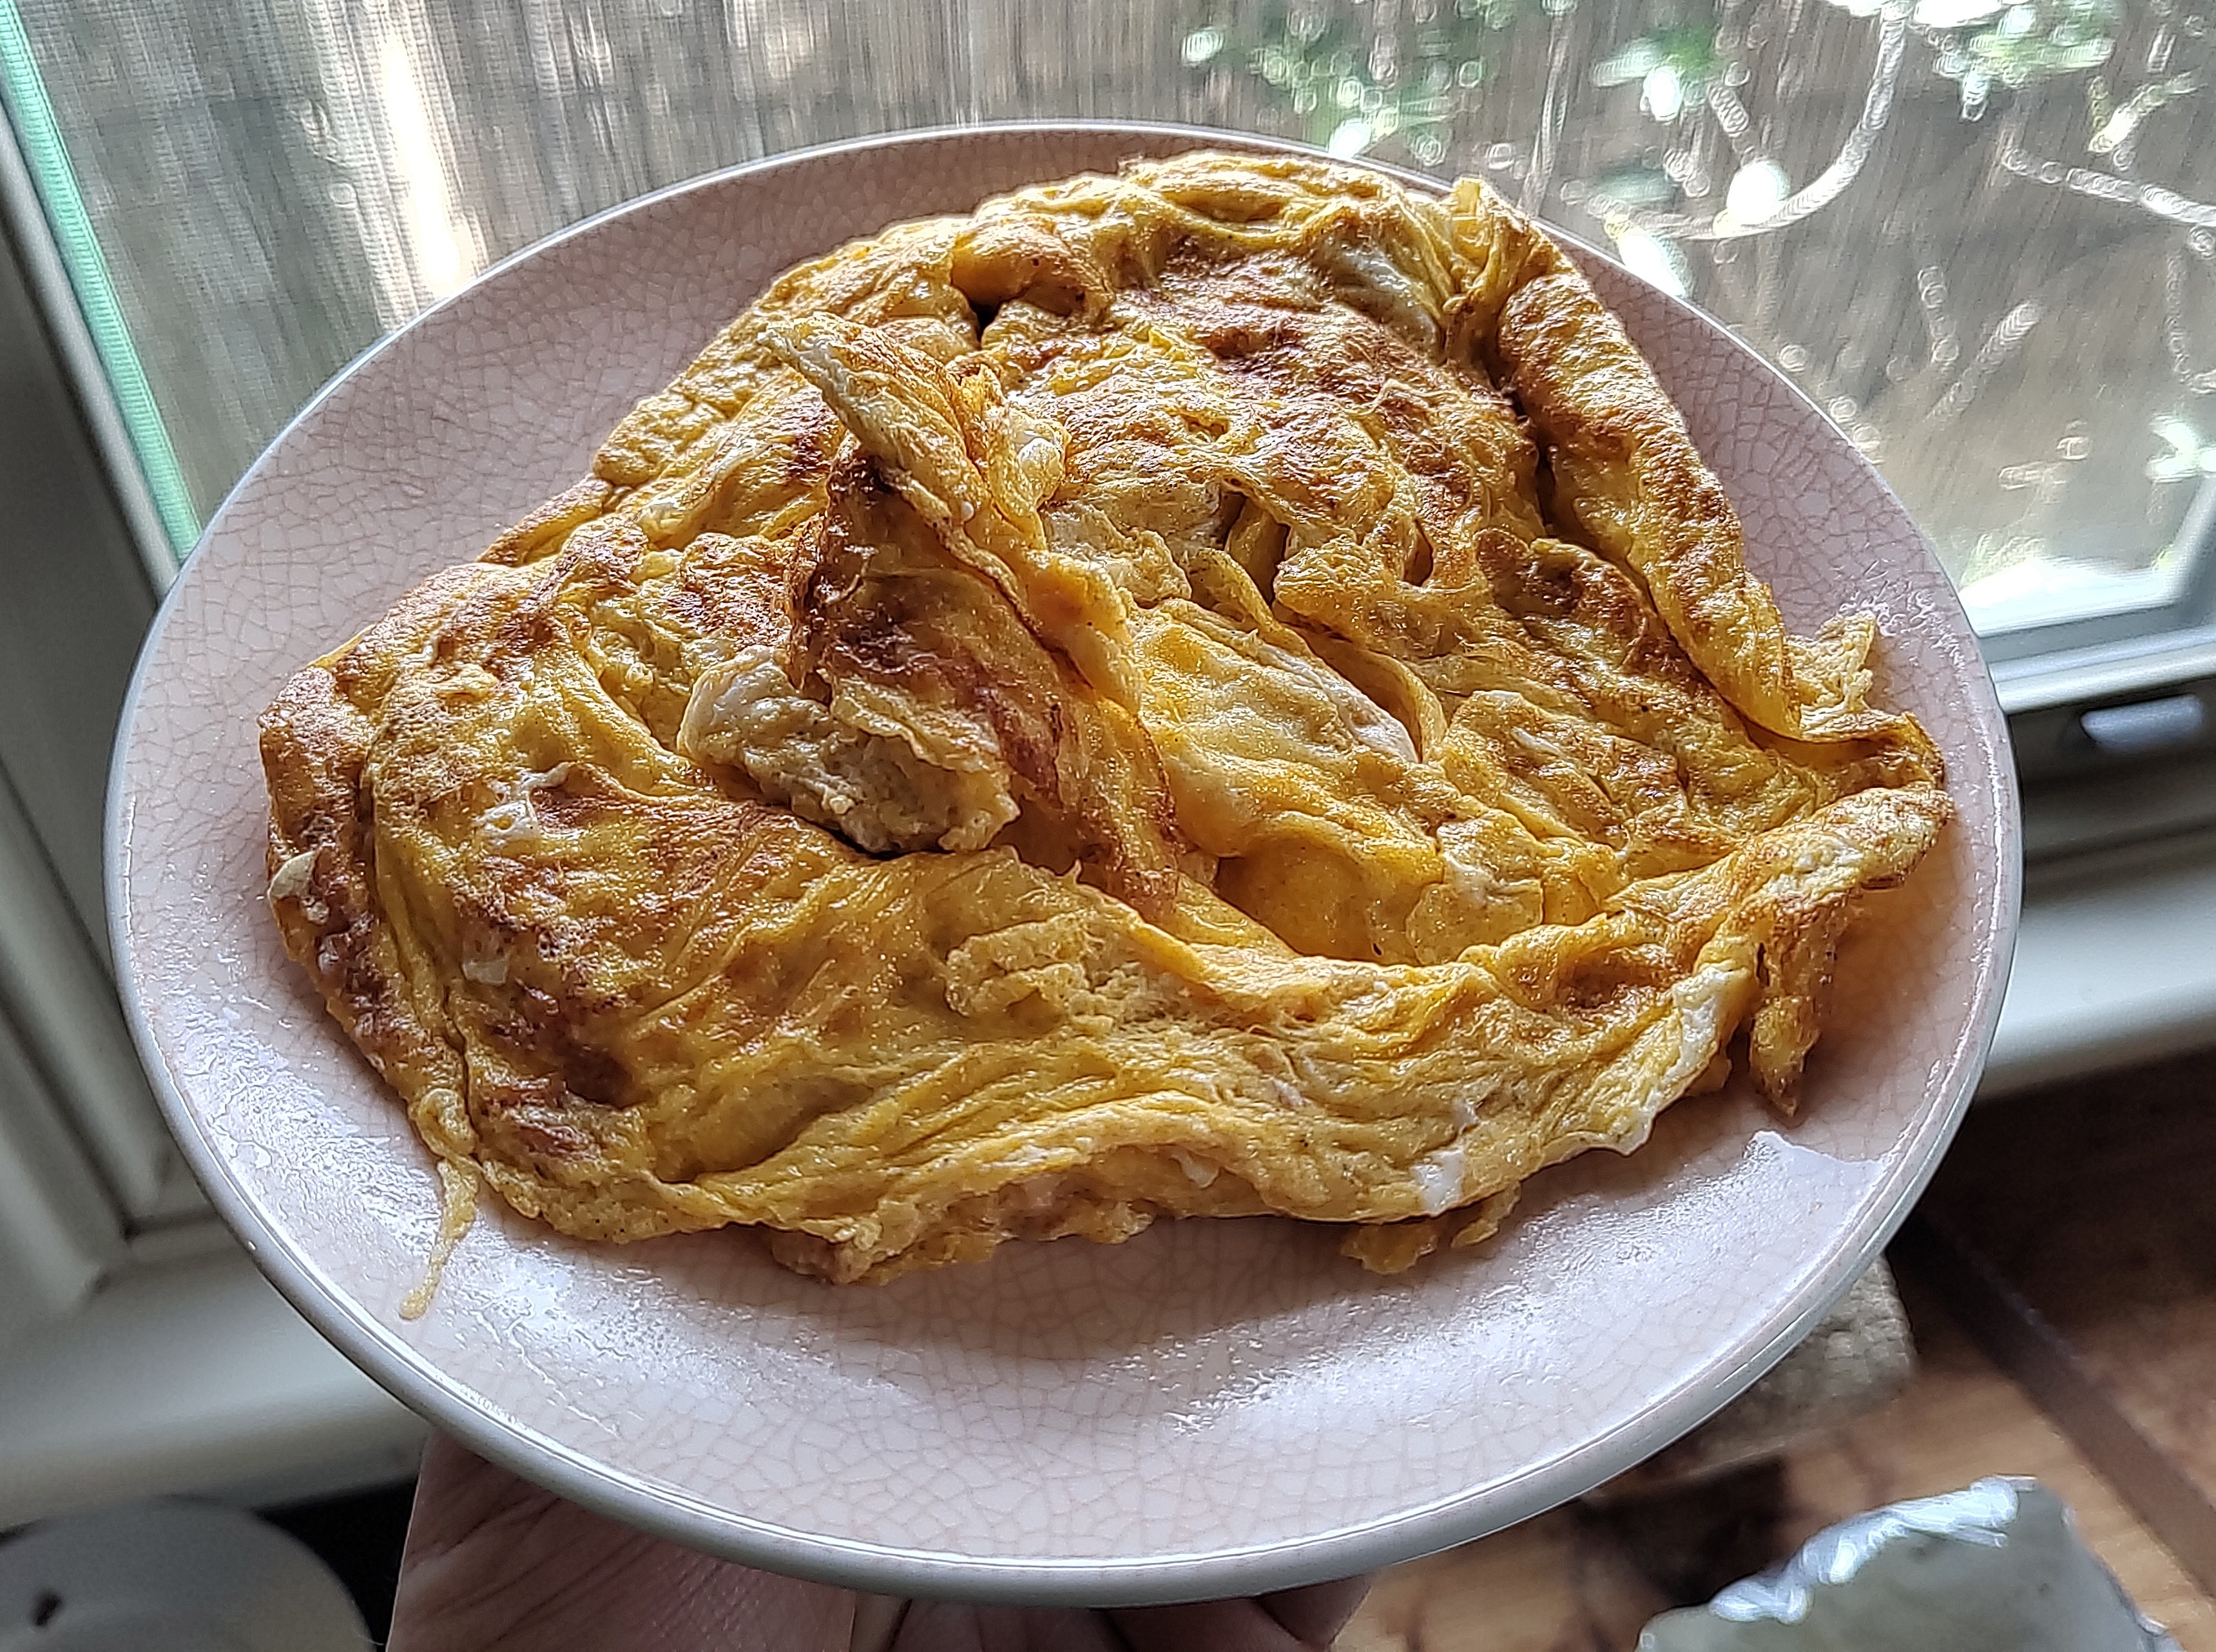 picture is of a spicy omelette